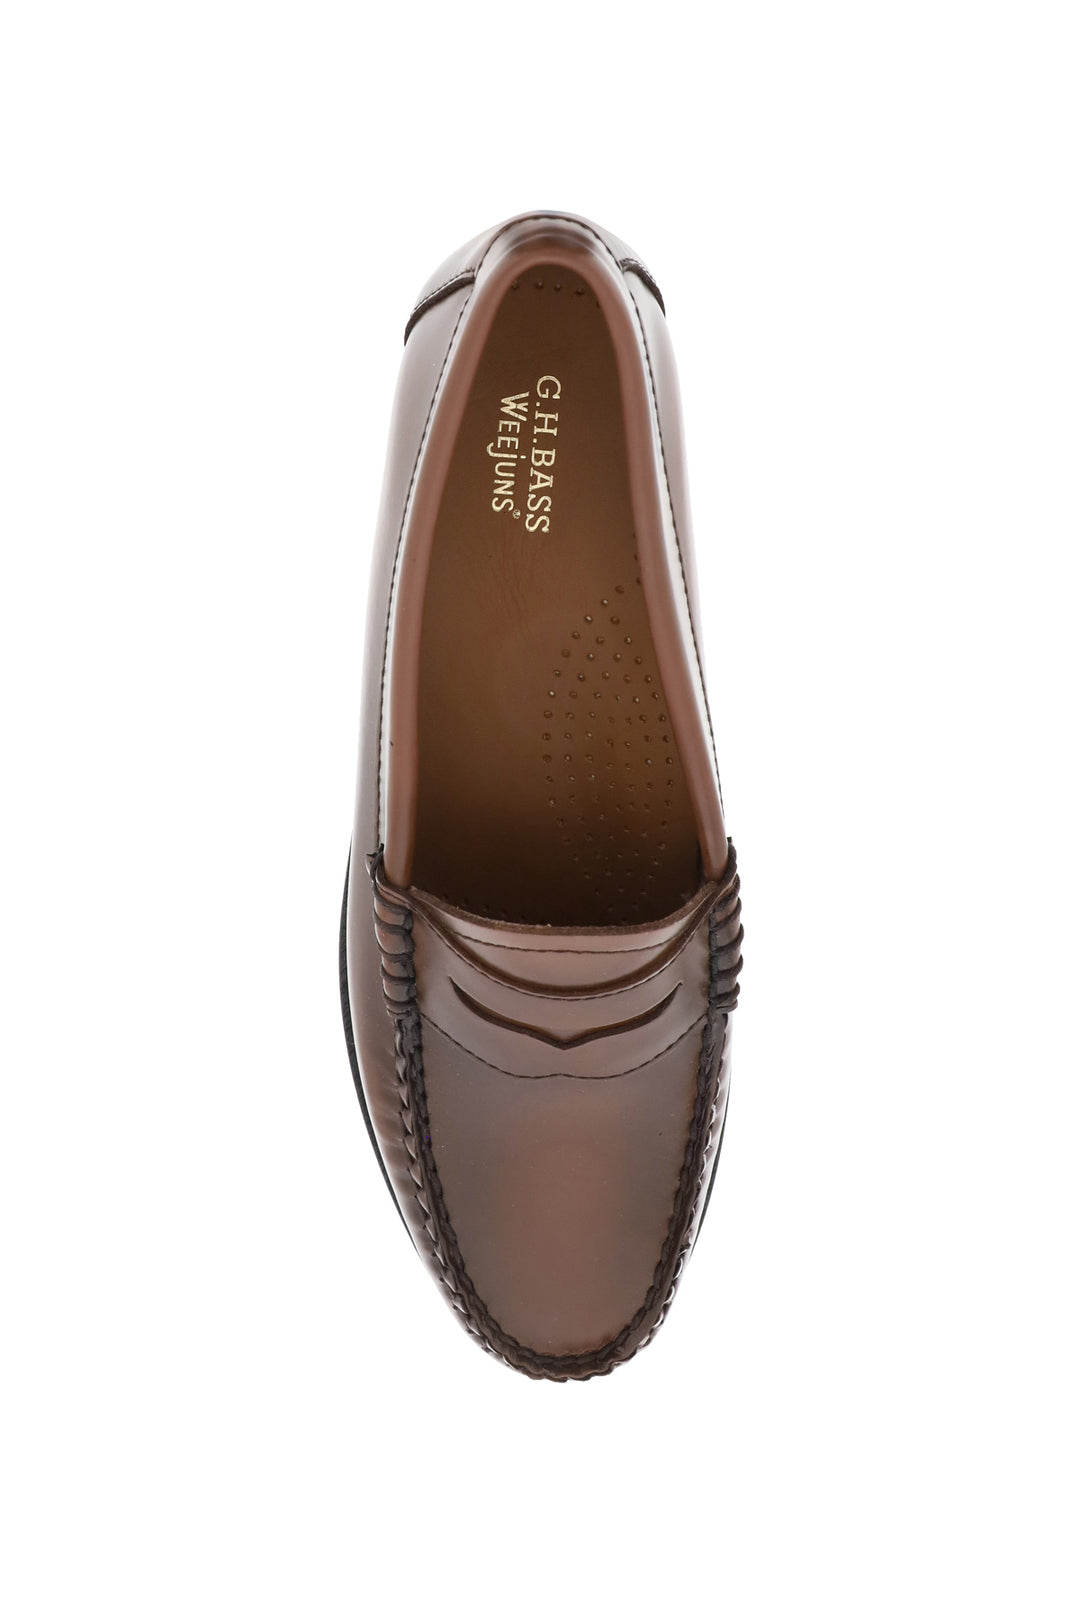 G.H. Bass 'Weejuns' Penny Loafers   Brown